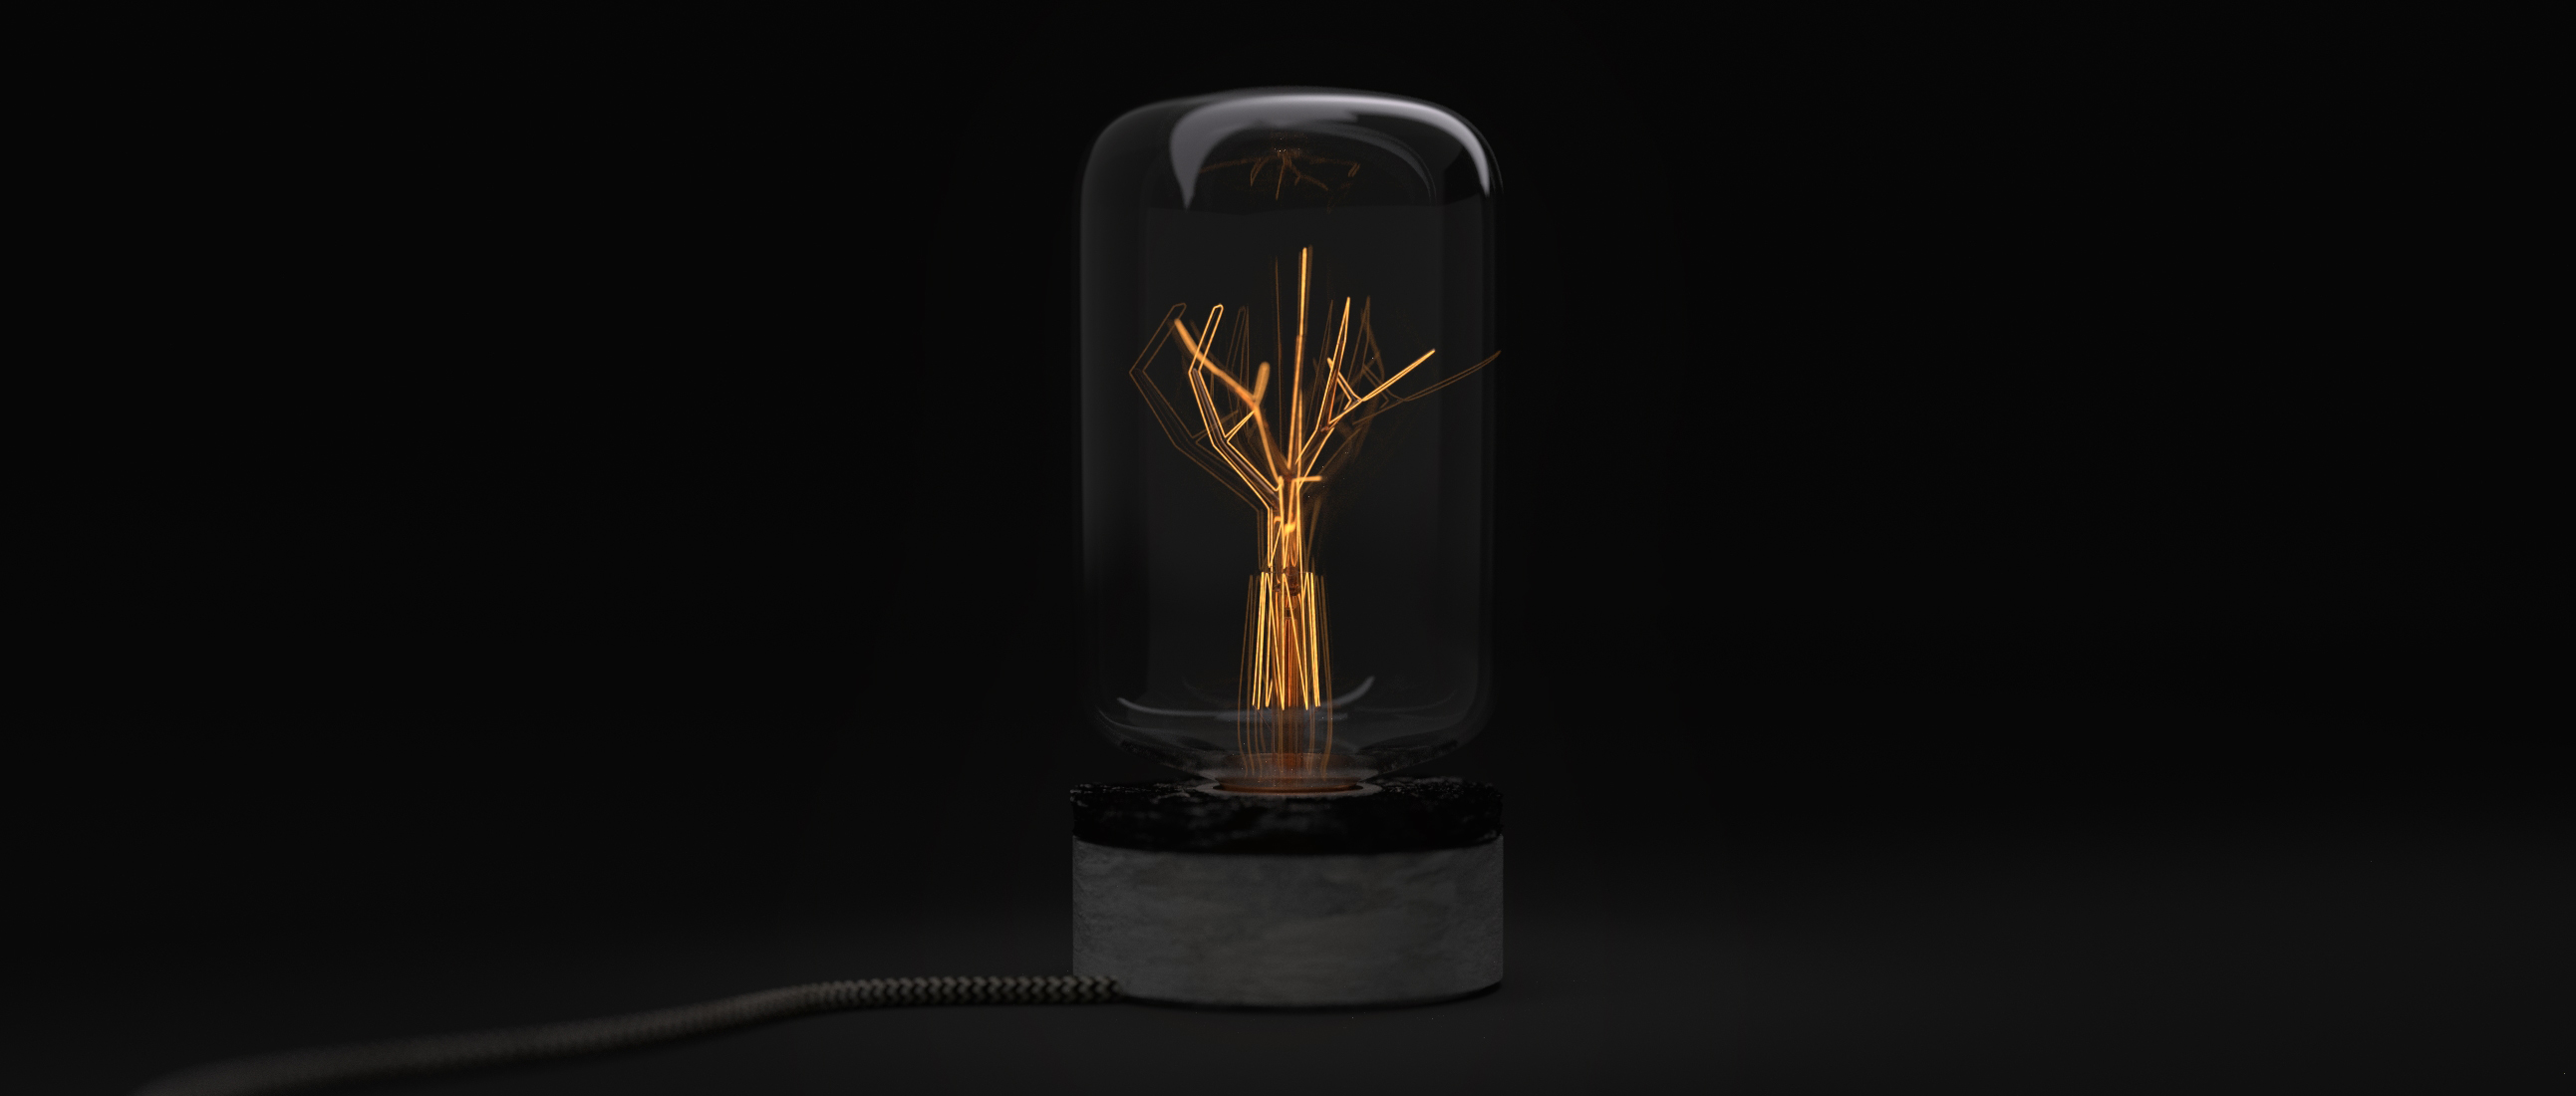 Light of hope: The Lamp with all details2